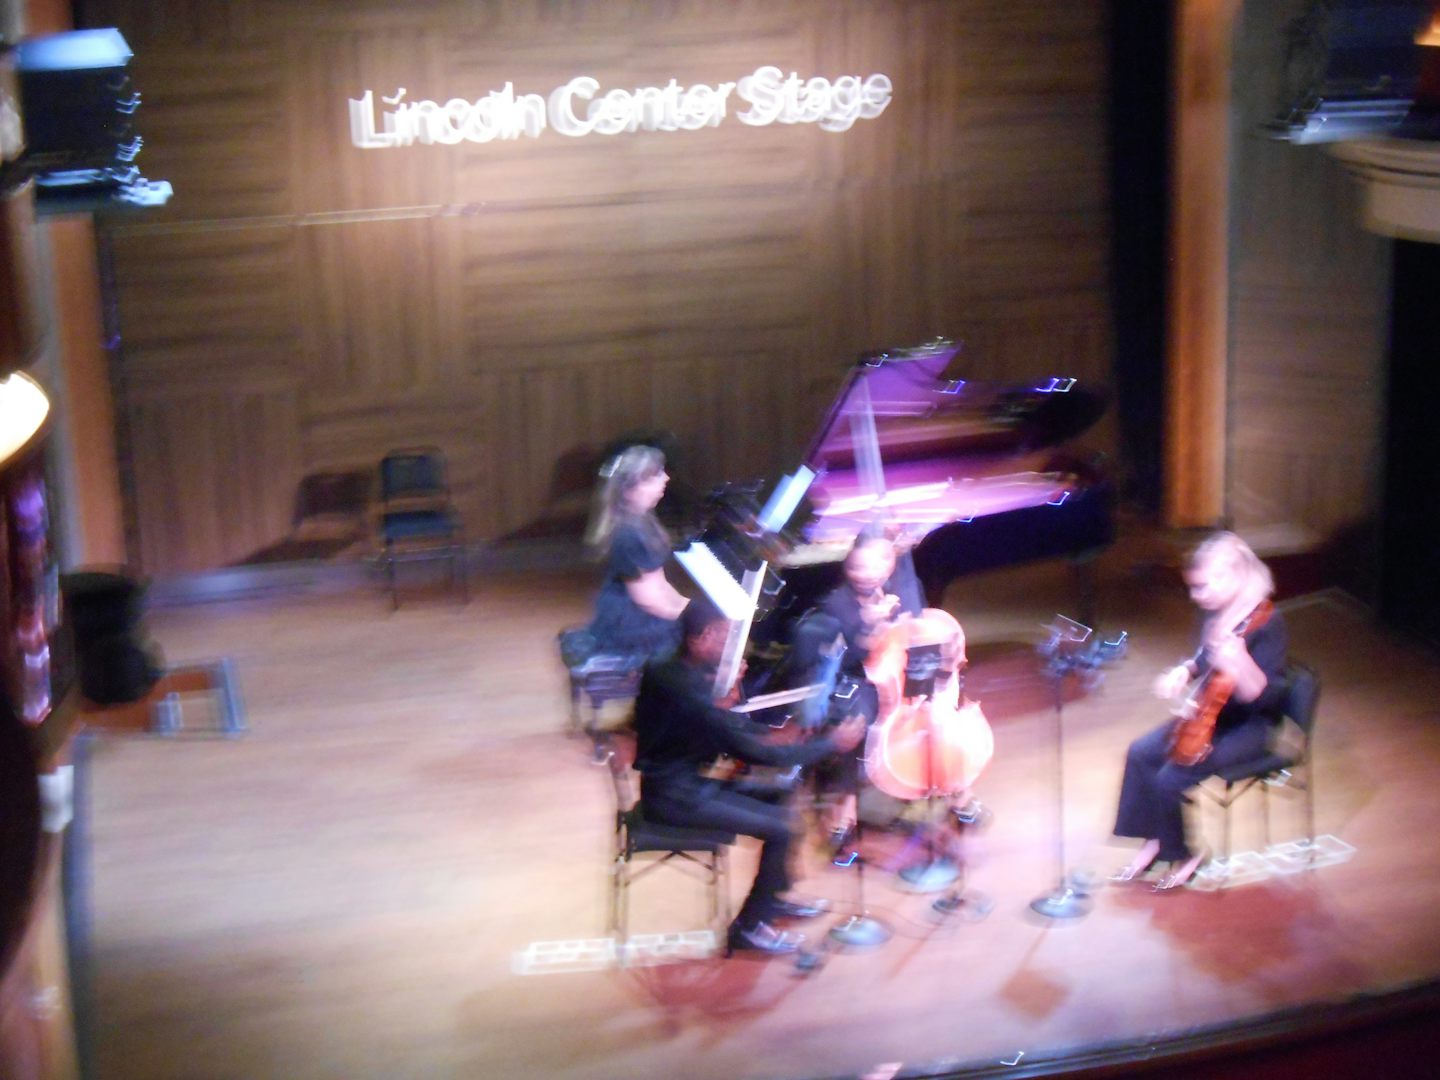 The classical string quartet. Very talented musicians.